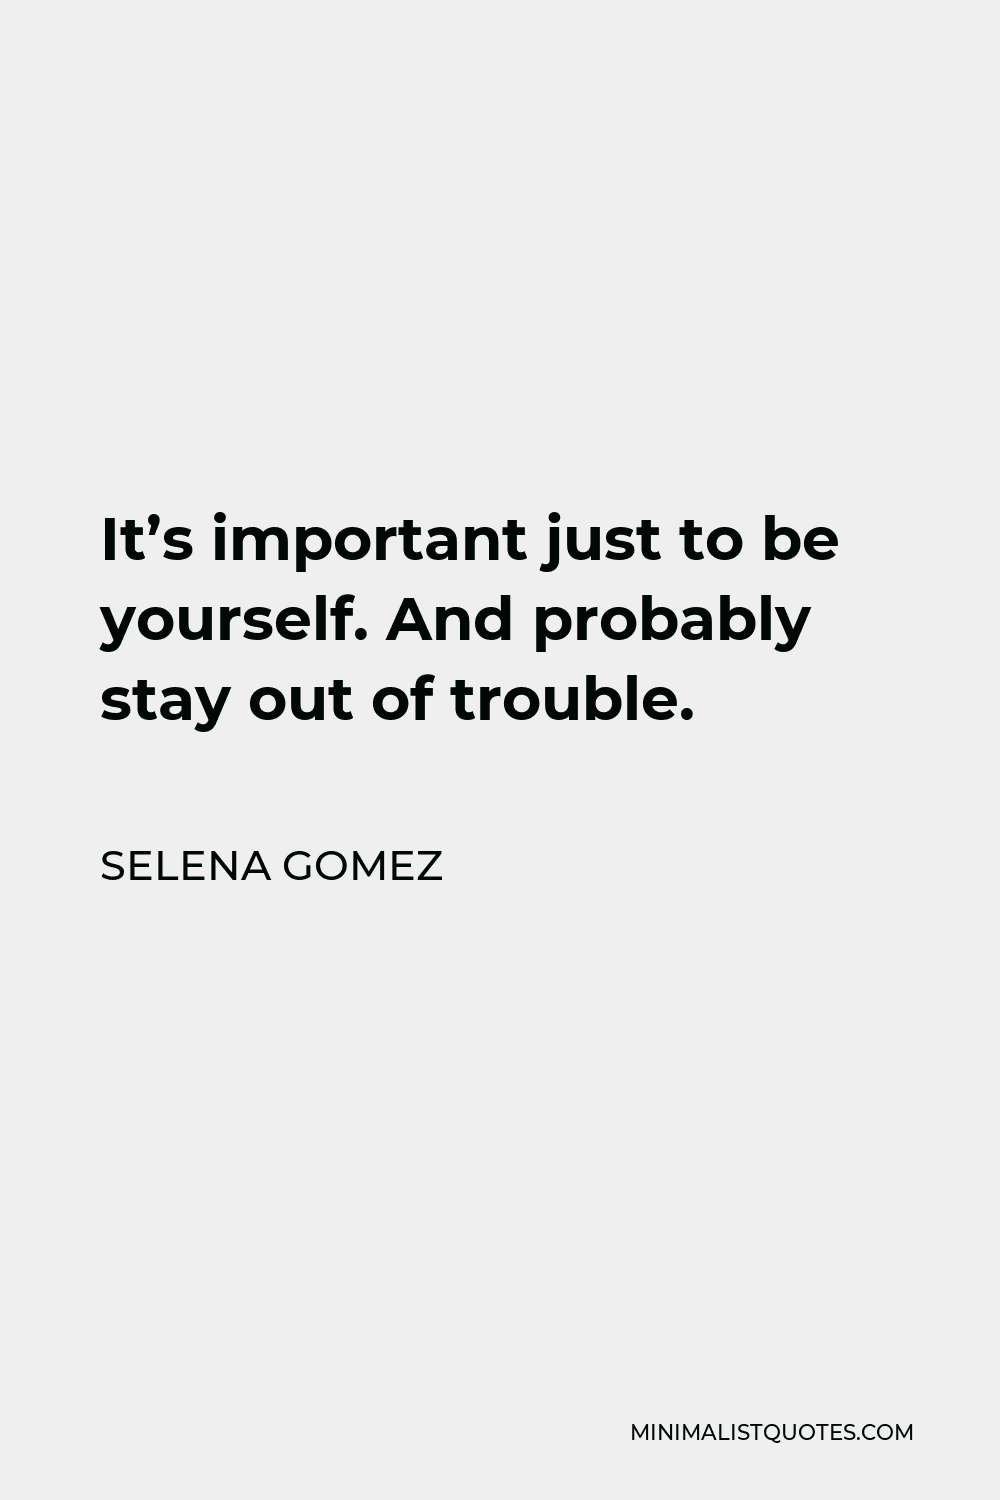 Selena Gomez Quote - It’s important just to be yourself. And probably stay out of trouble.